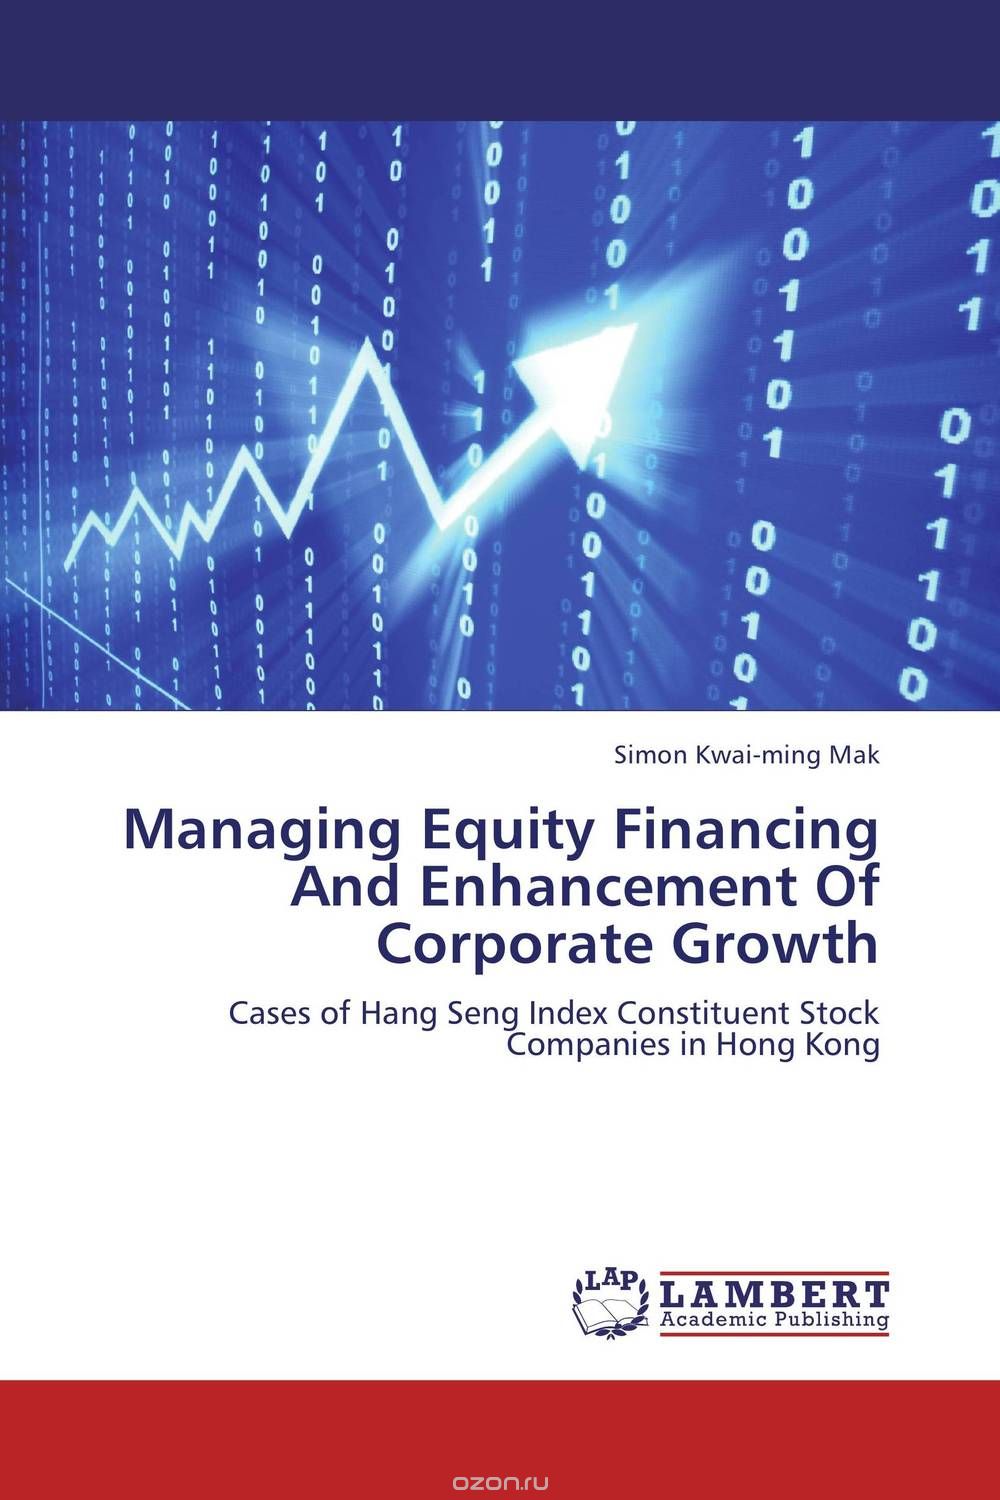 Managing Equity Financing And Enhancement Of Corporate Growth